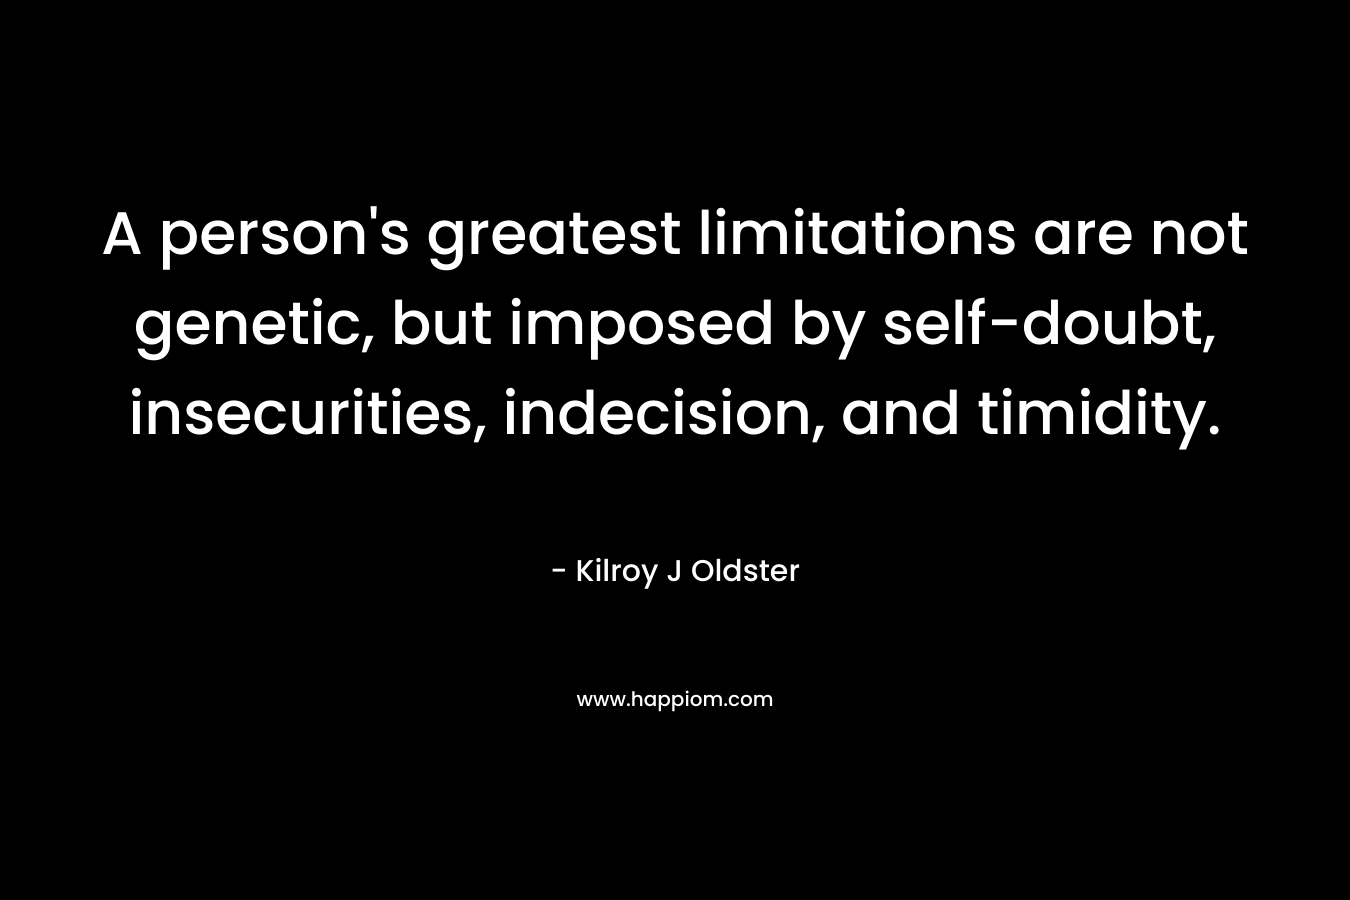 A person's greatest limitations are not genetic, but imposed by self-doubt, insecurities, indecision, and timidity.